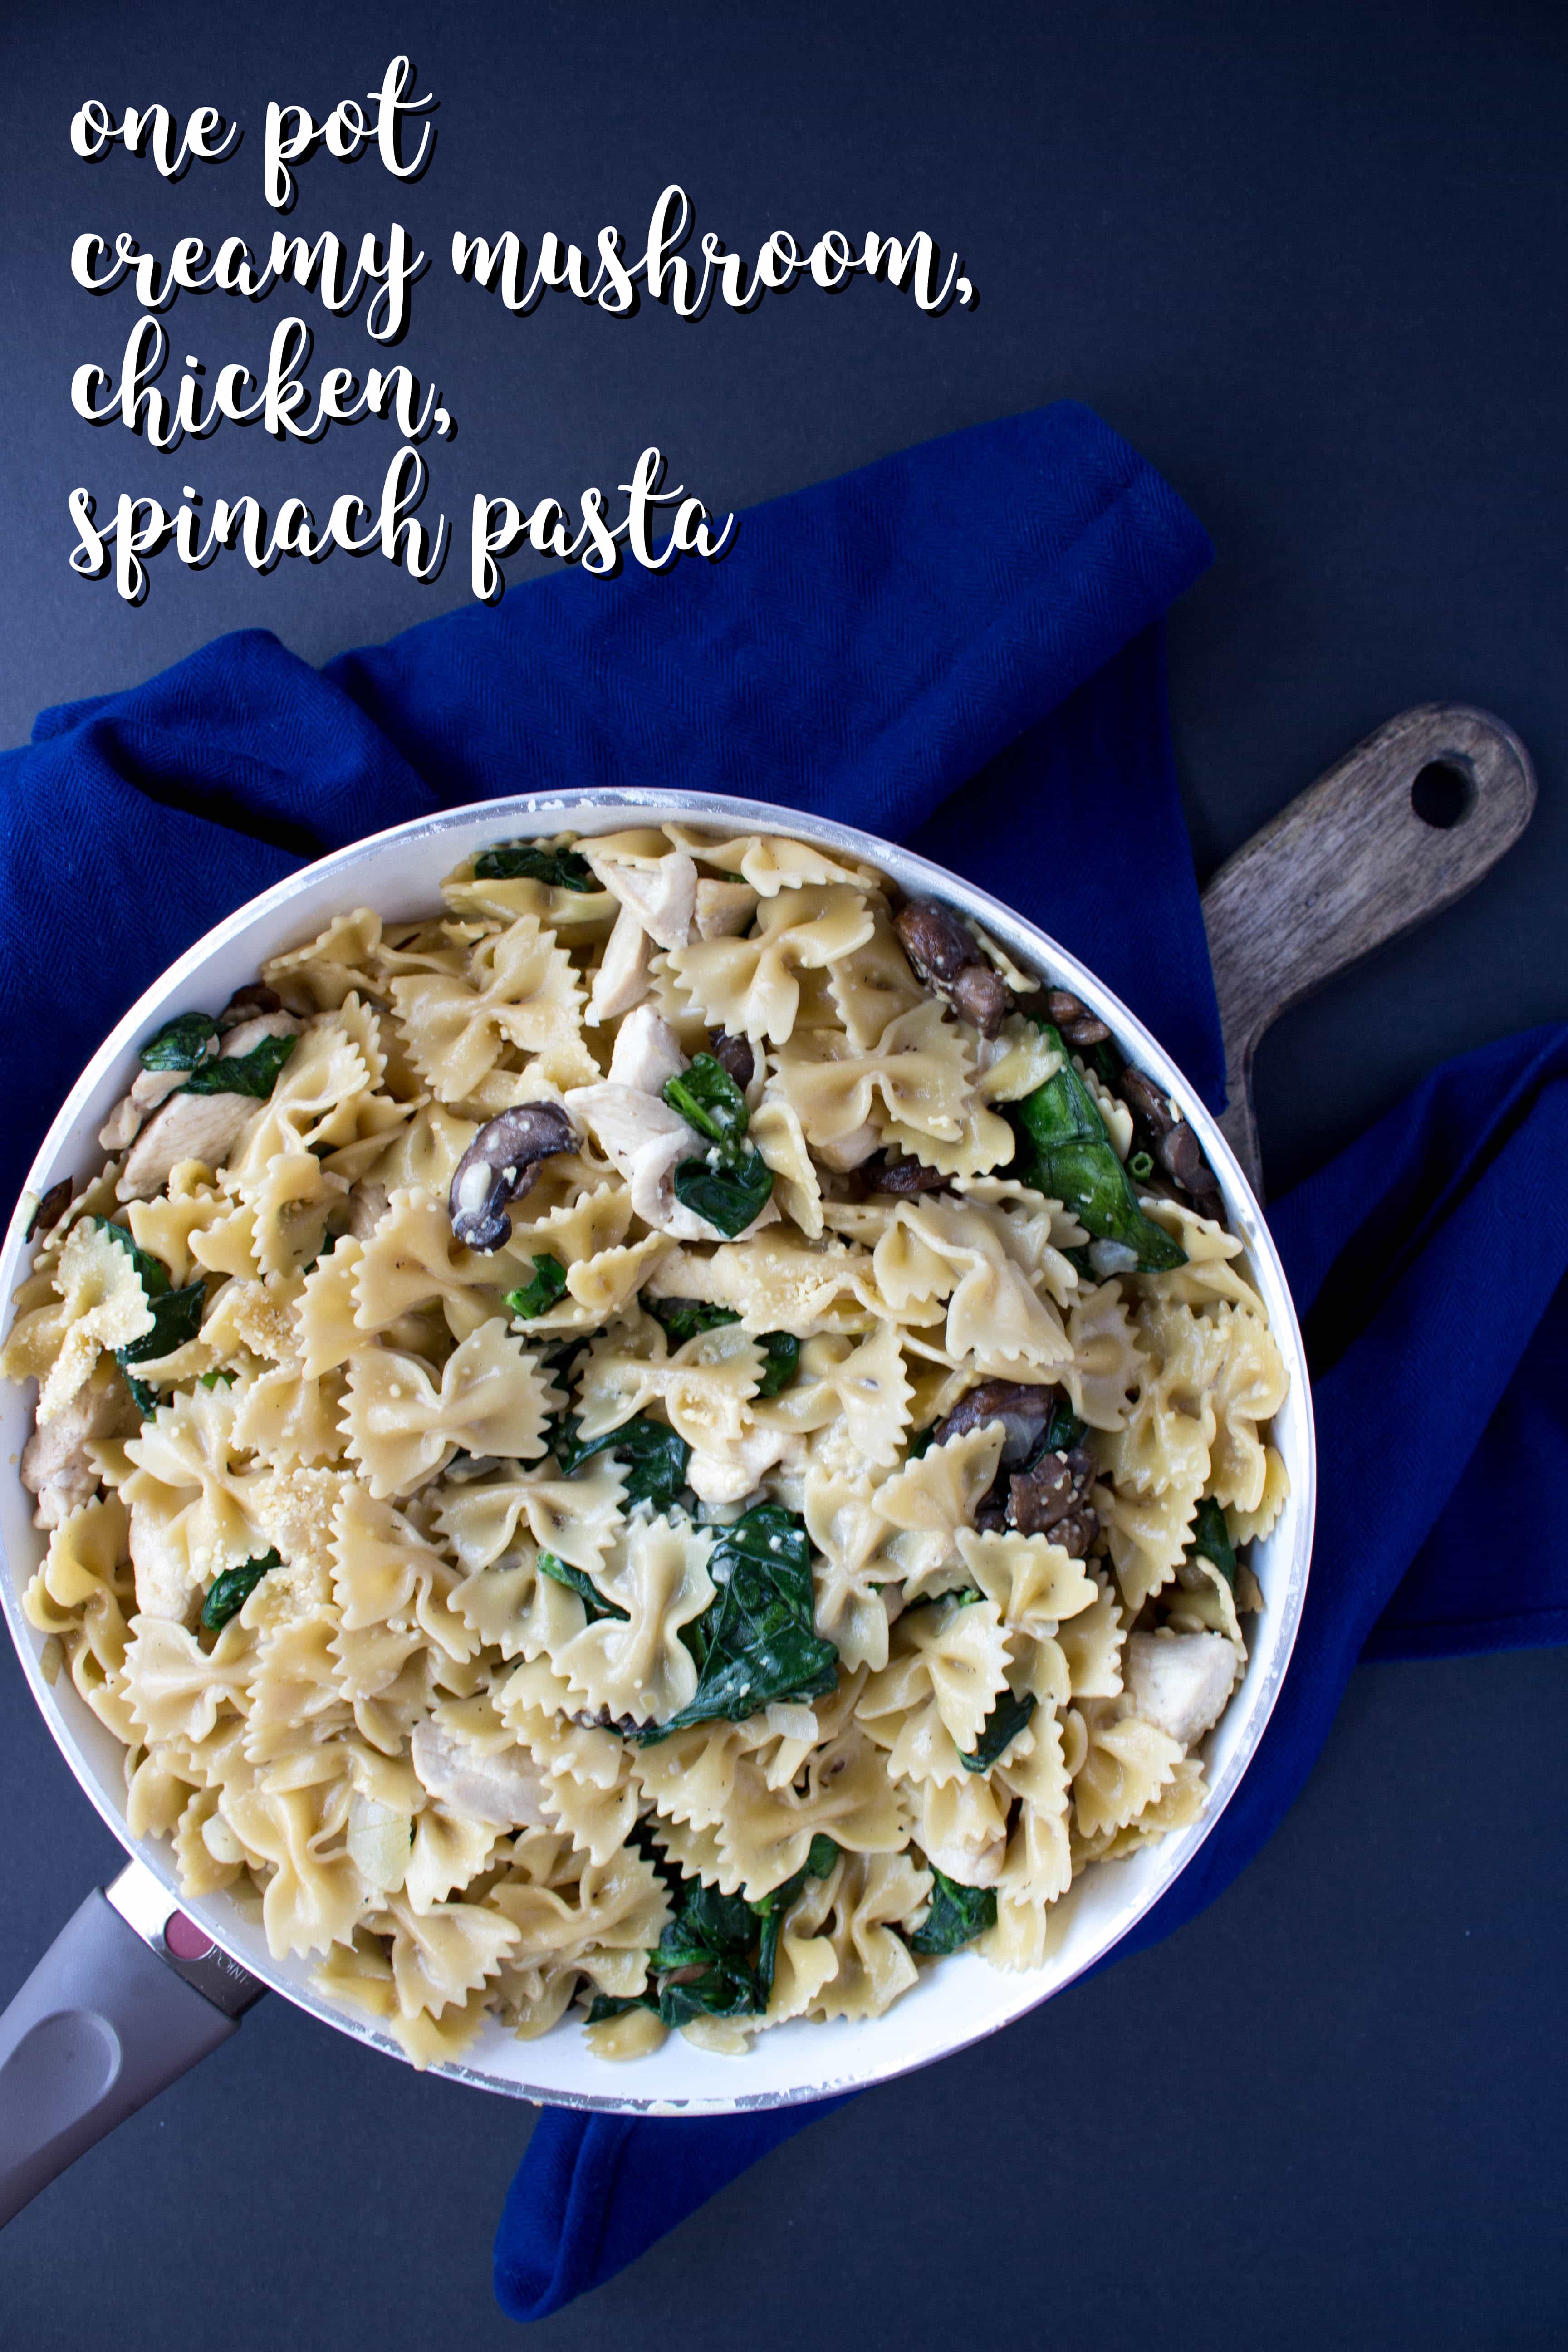 The perfect pasta for Valentine's or just a meal prep for the week. Either way, it's delicious, creamy, and easily made in one pot!